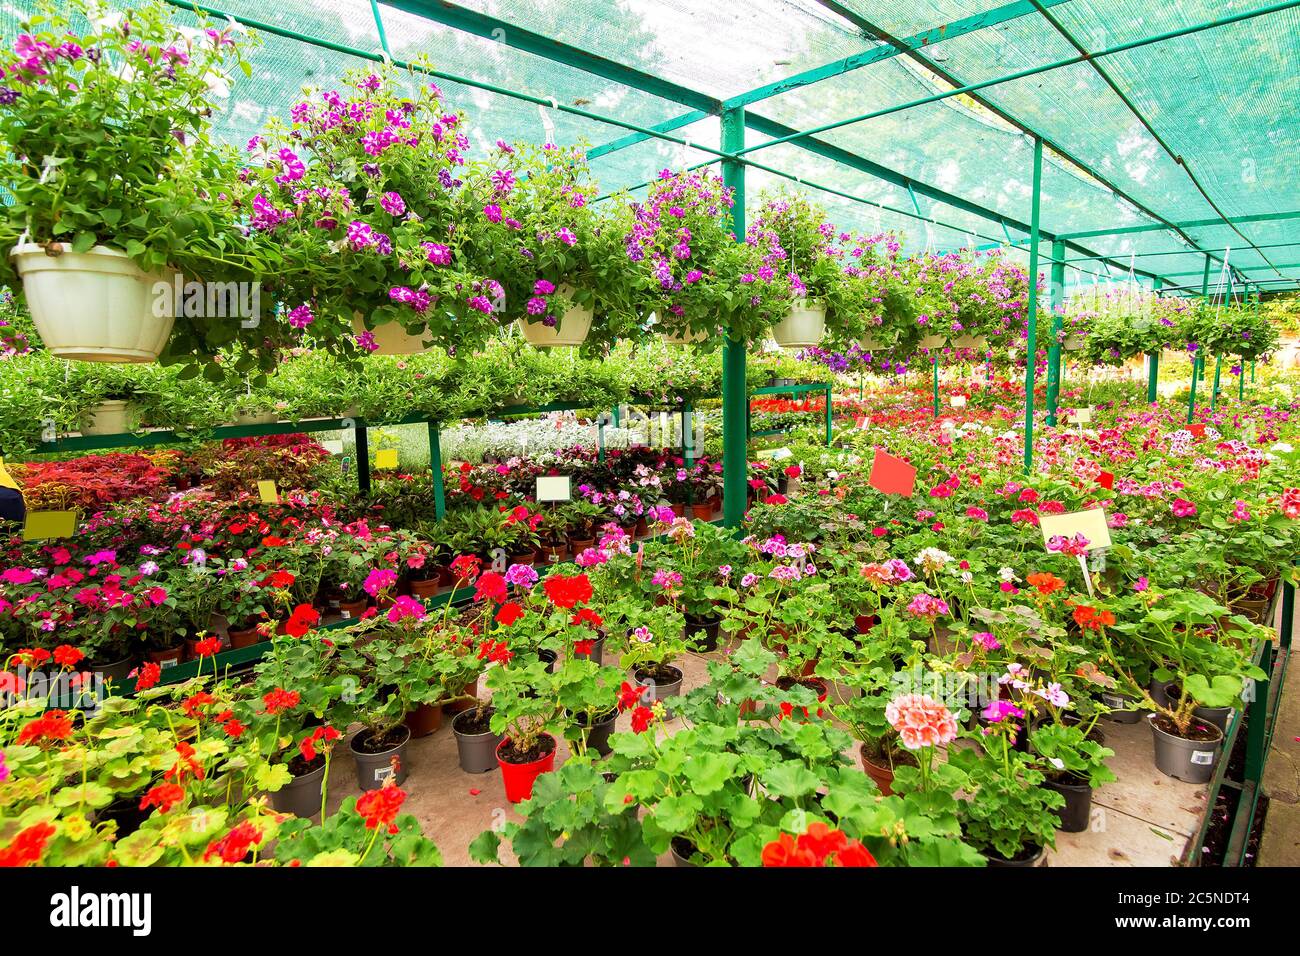 Showcase with shelves selling garden plants for landscaping flower beds and  backyard decor Stock Photo - Alamy